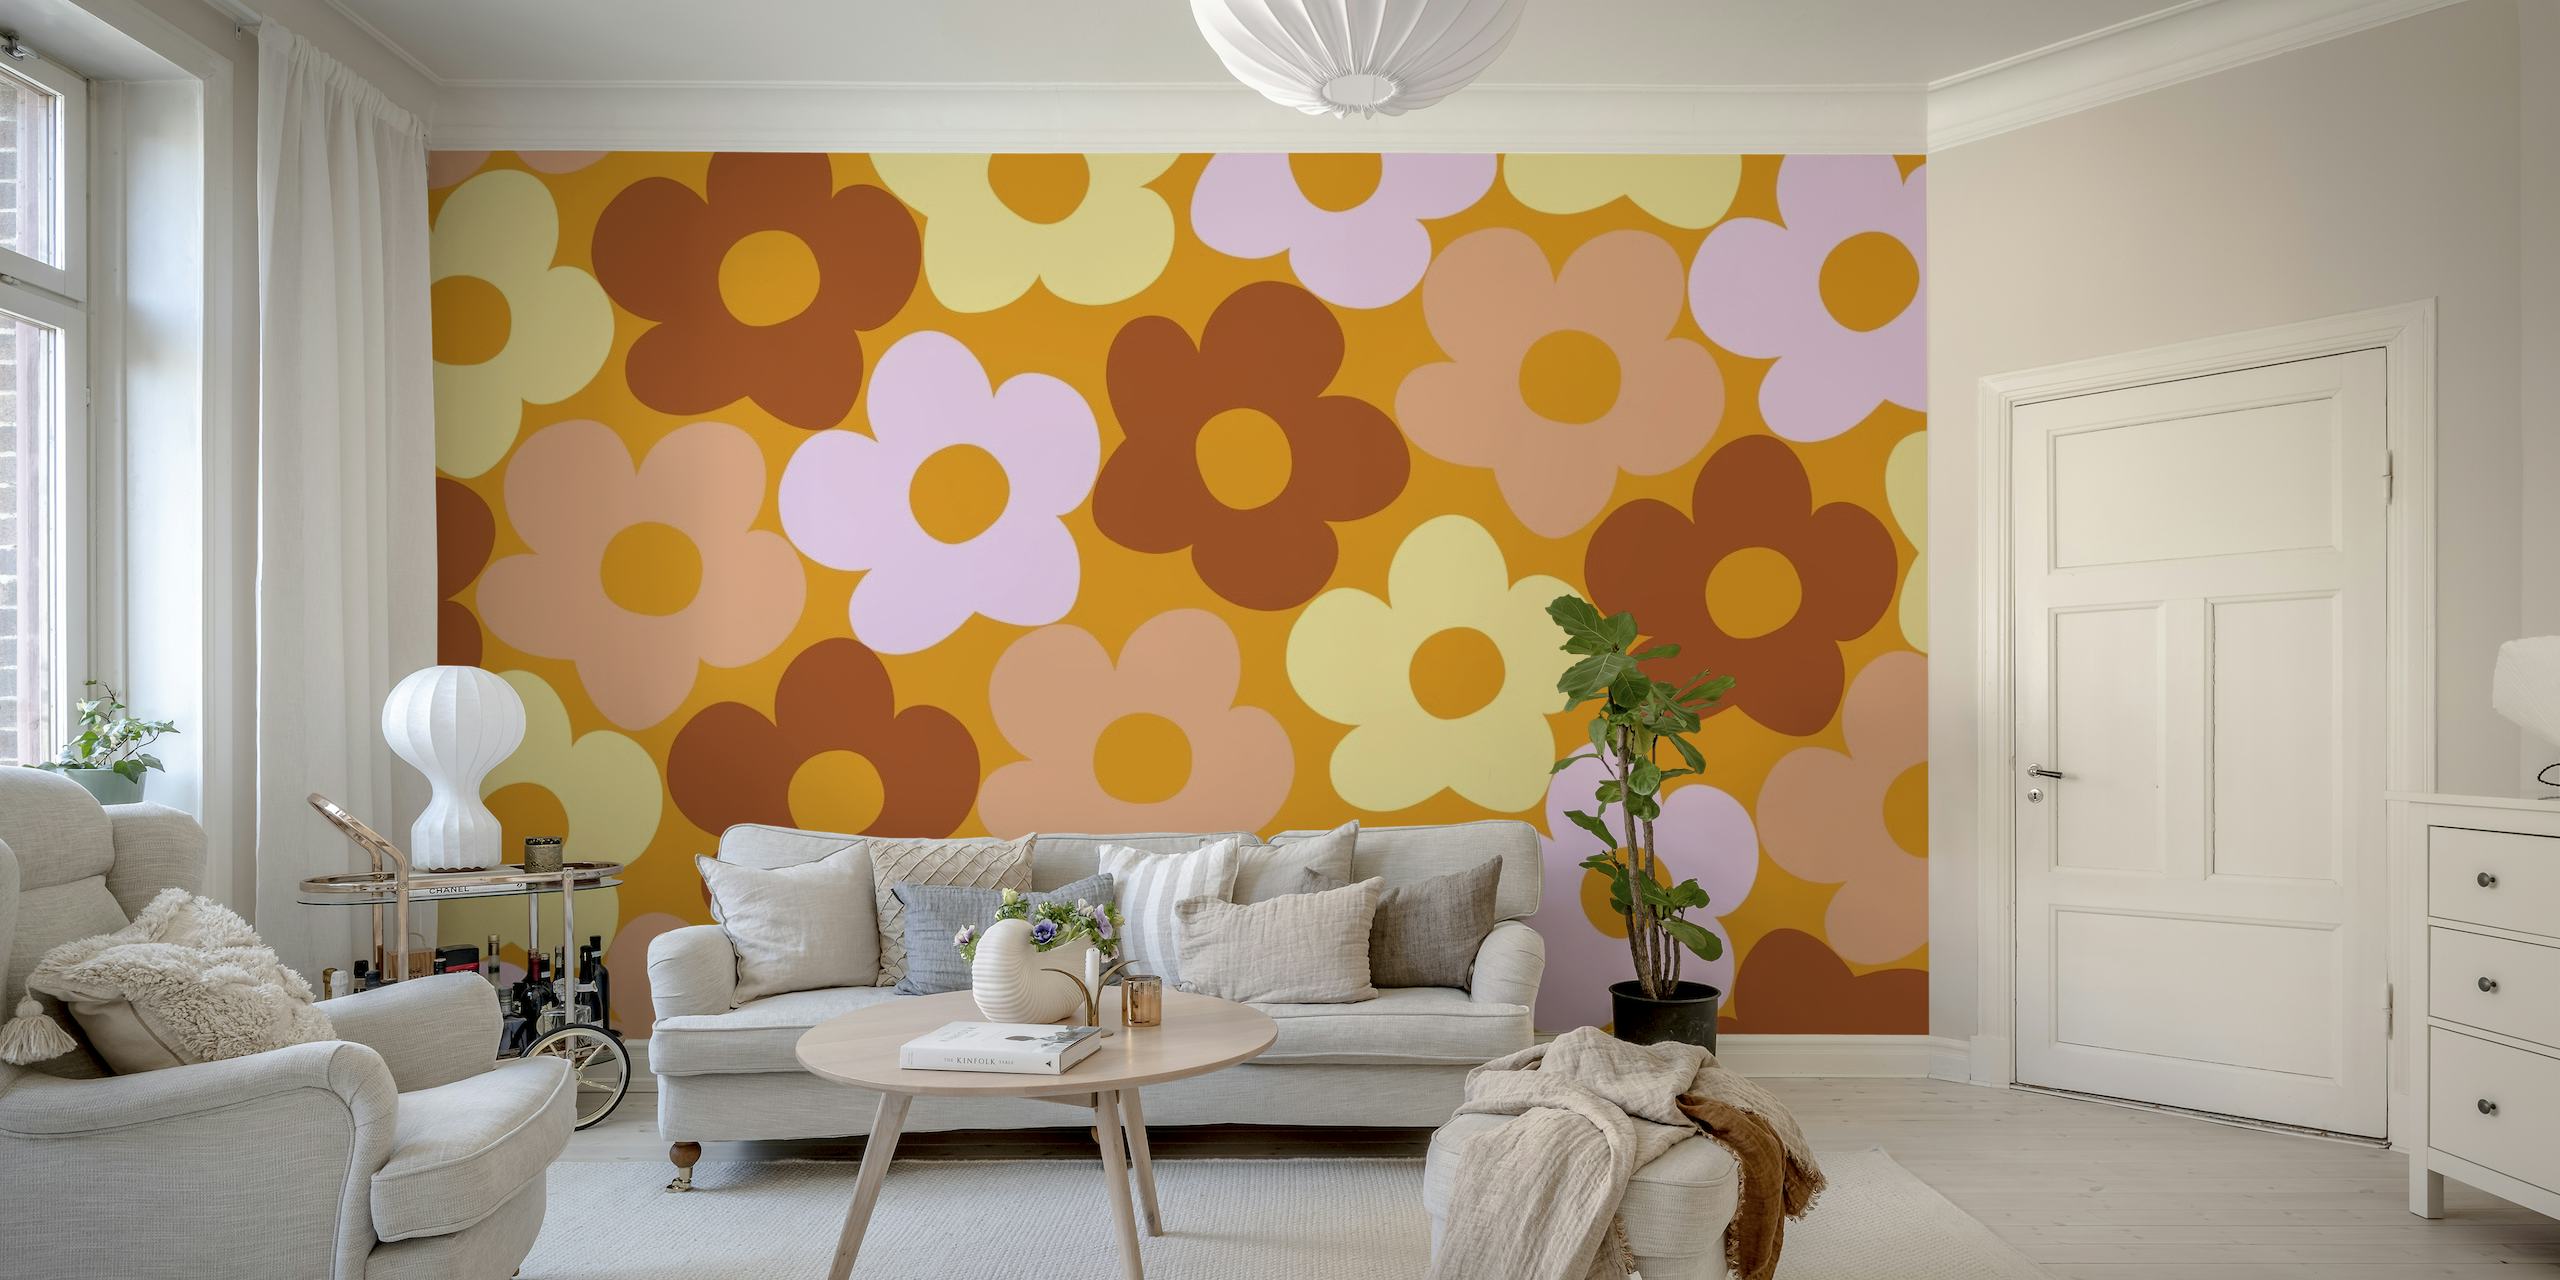 Retro-inspired wall mural with a pattern of fall daisies in warm hues on happywall.com